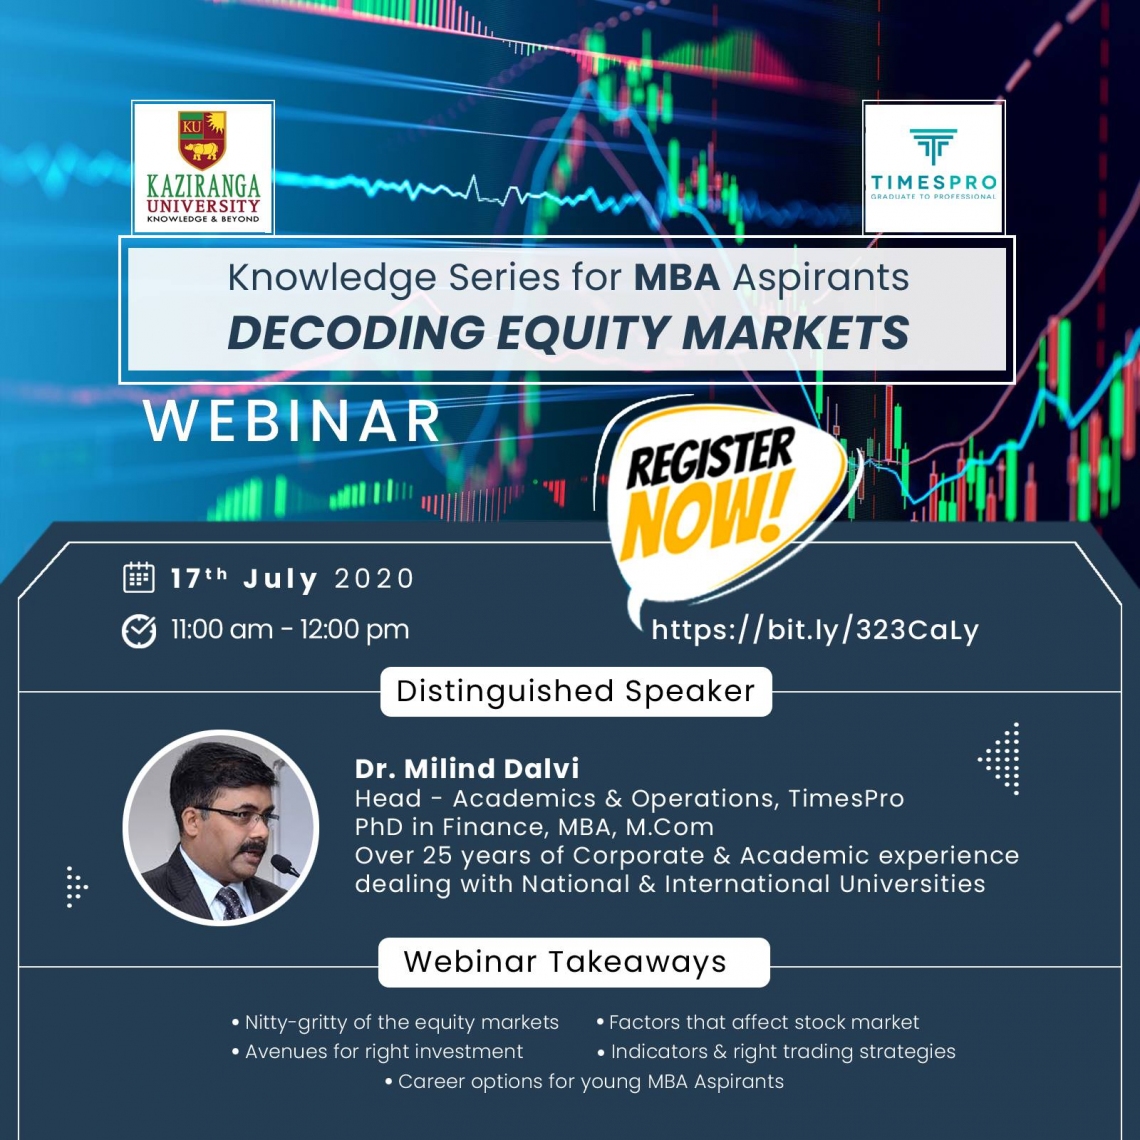 Webinar for MBA aspirants. Topic-"Decoding Equity Markets", with expert speaker Dr Milind Dalvi, Head, Academics and Operations, TimesPro